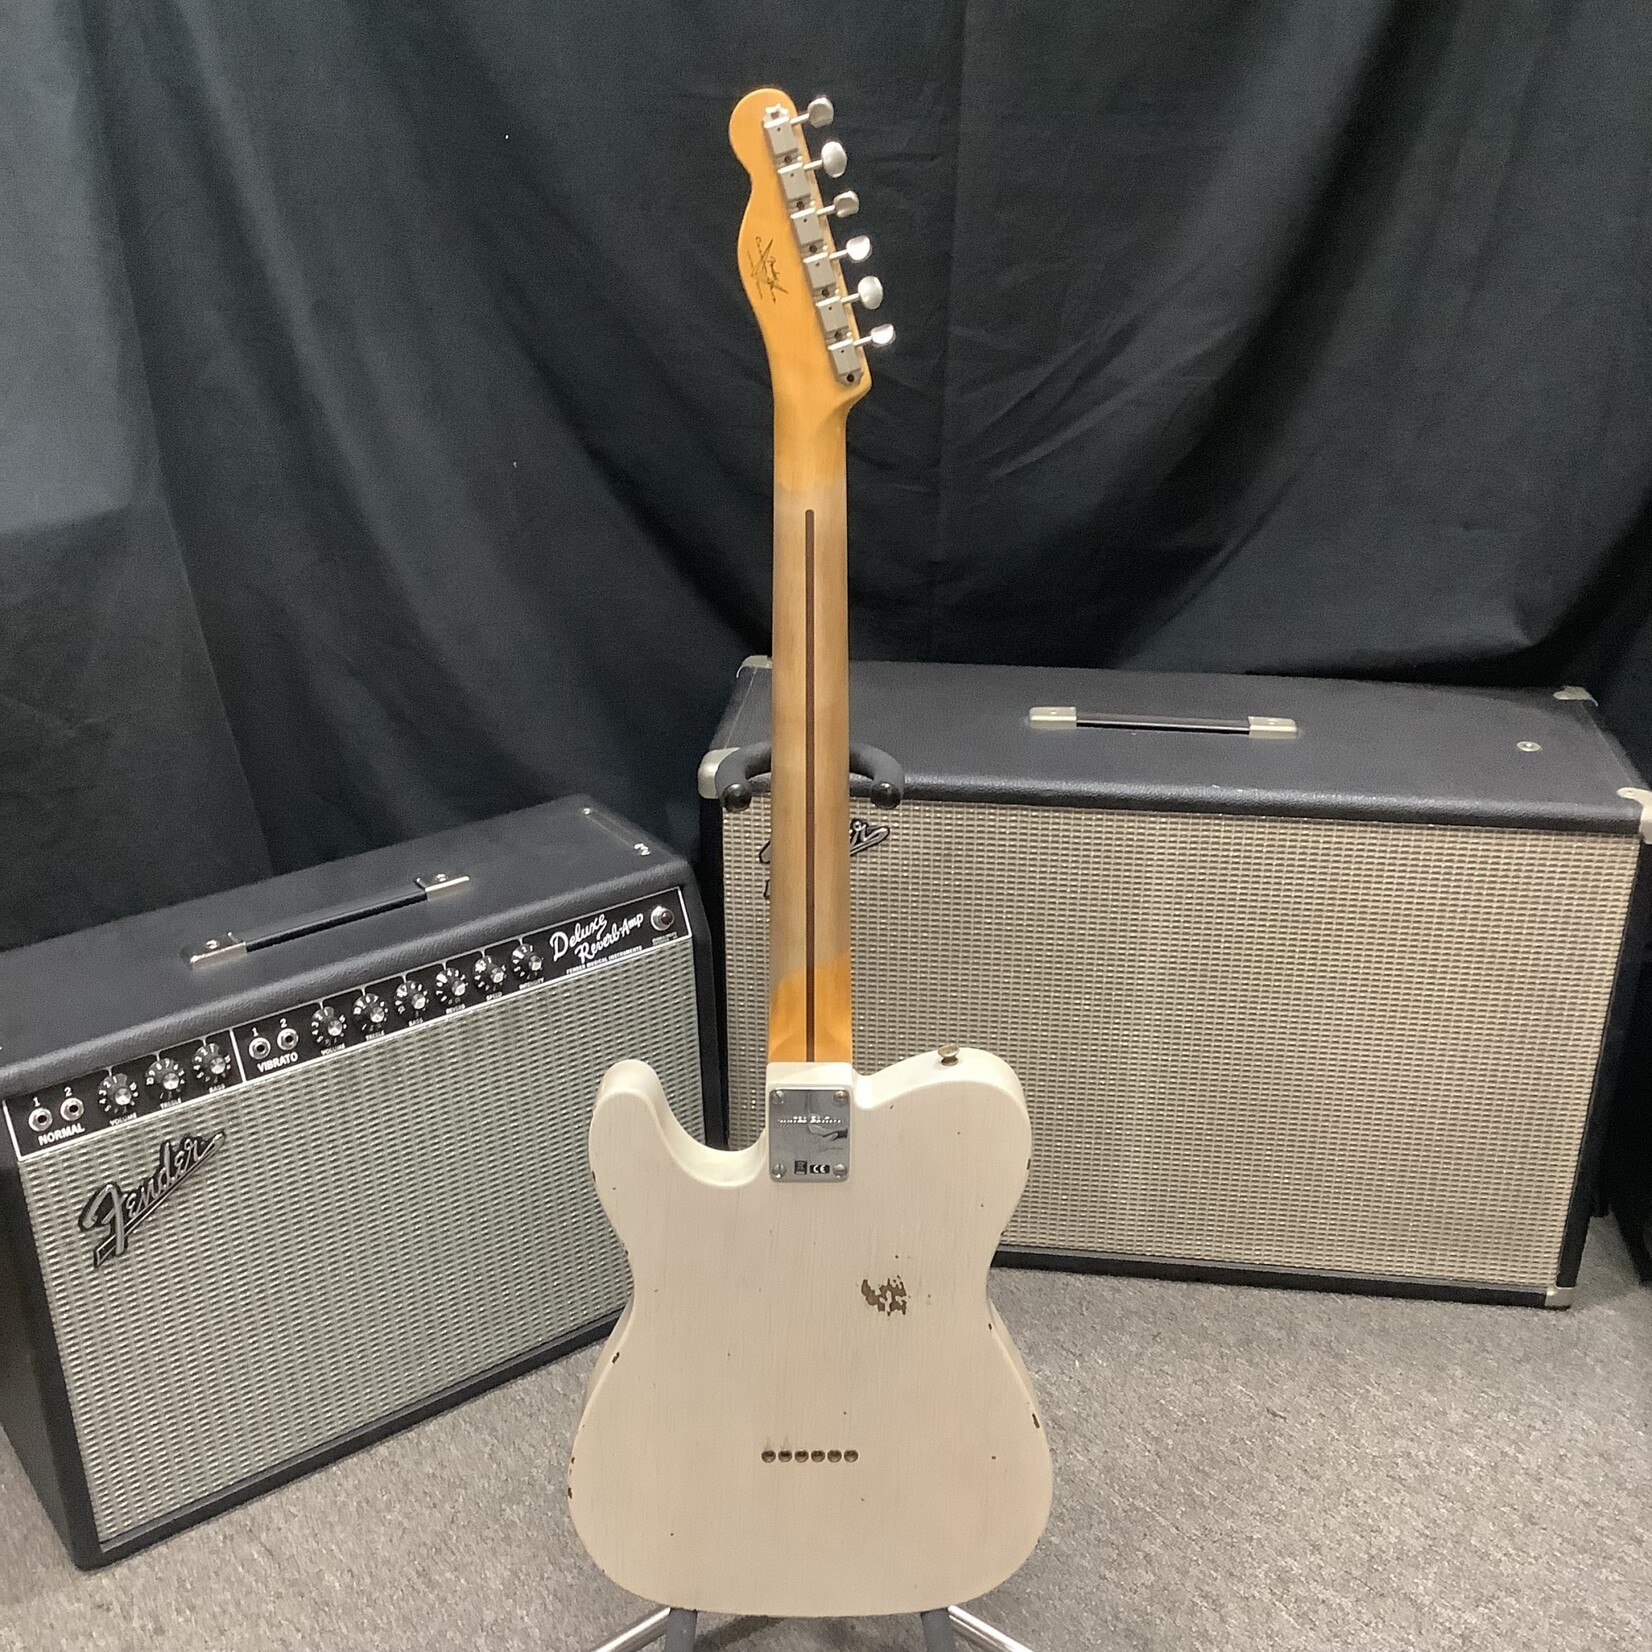 Fender 2021 Fender Custom Shop Limited Edition Roasted Pine Double Esquire Relic Aged White Blonde